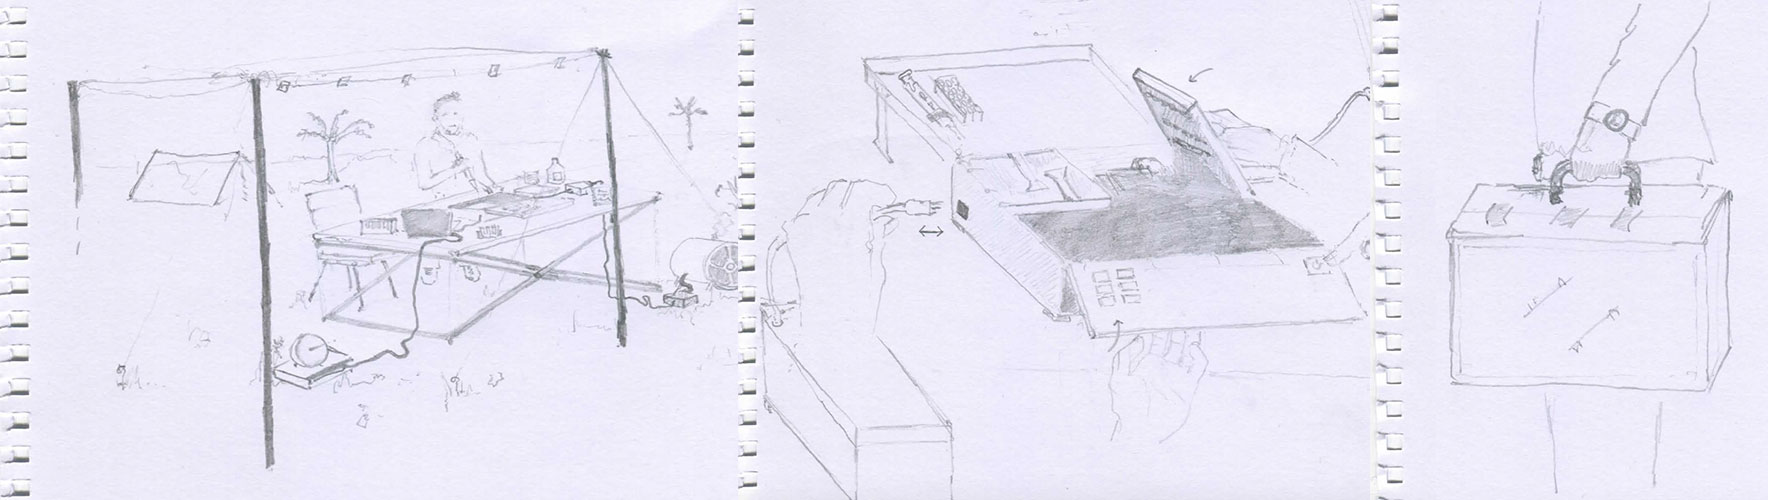 First concept sketches for “Darwin Toolbox” (drawn by Oran Maguire)